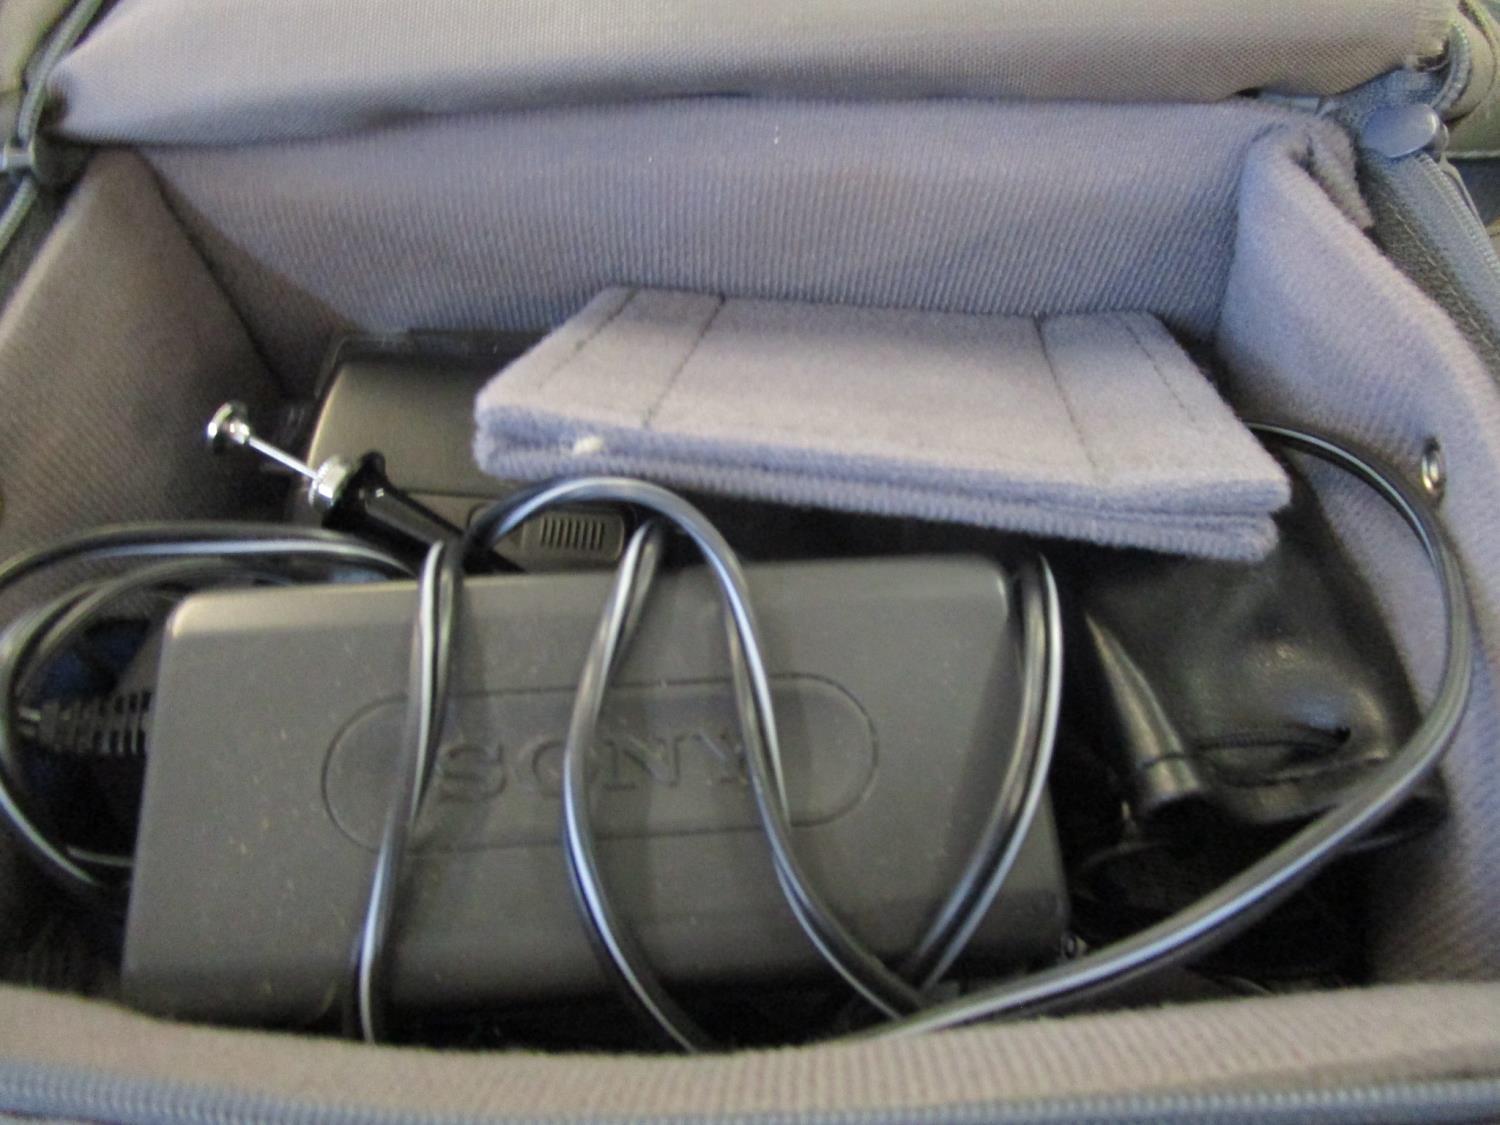 A Sony Digital Handy camcorder in case and a camera bag with various lenses, along with an - Image 3 of 3